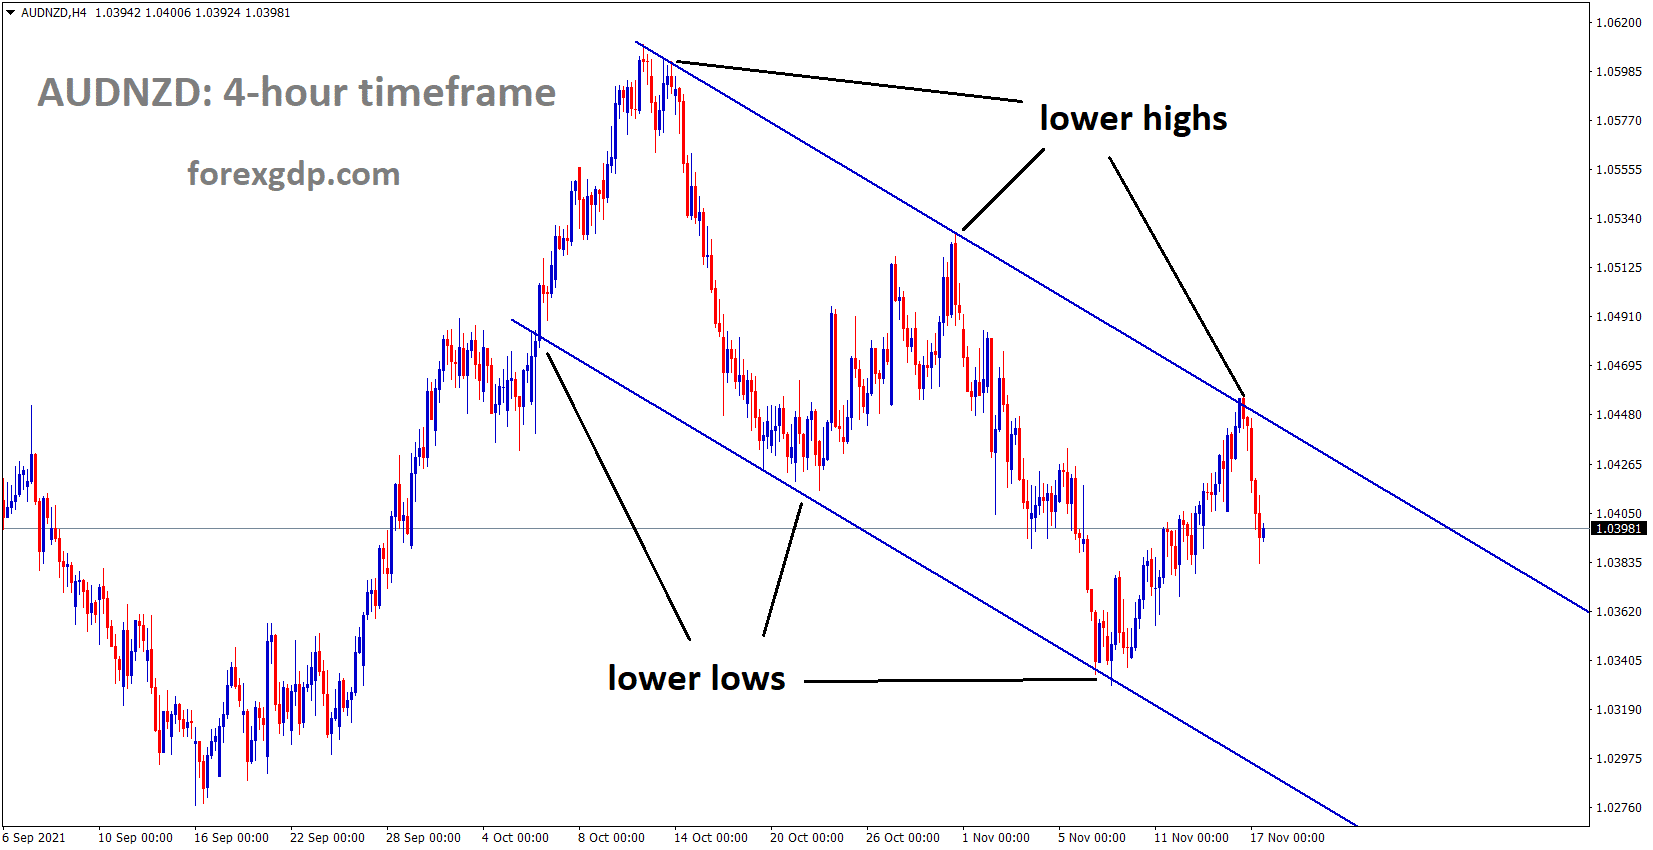 AUDNZD is moving in the Descending channel and fell from the lower higher of the channel